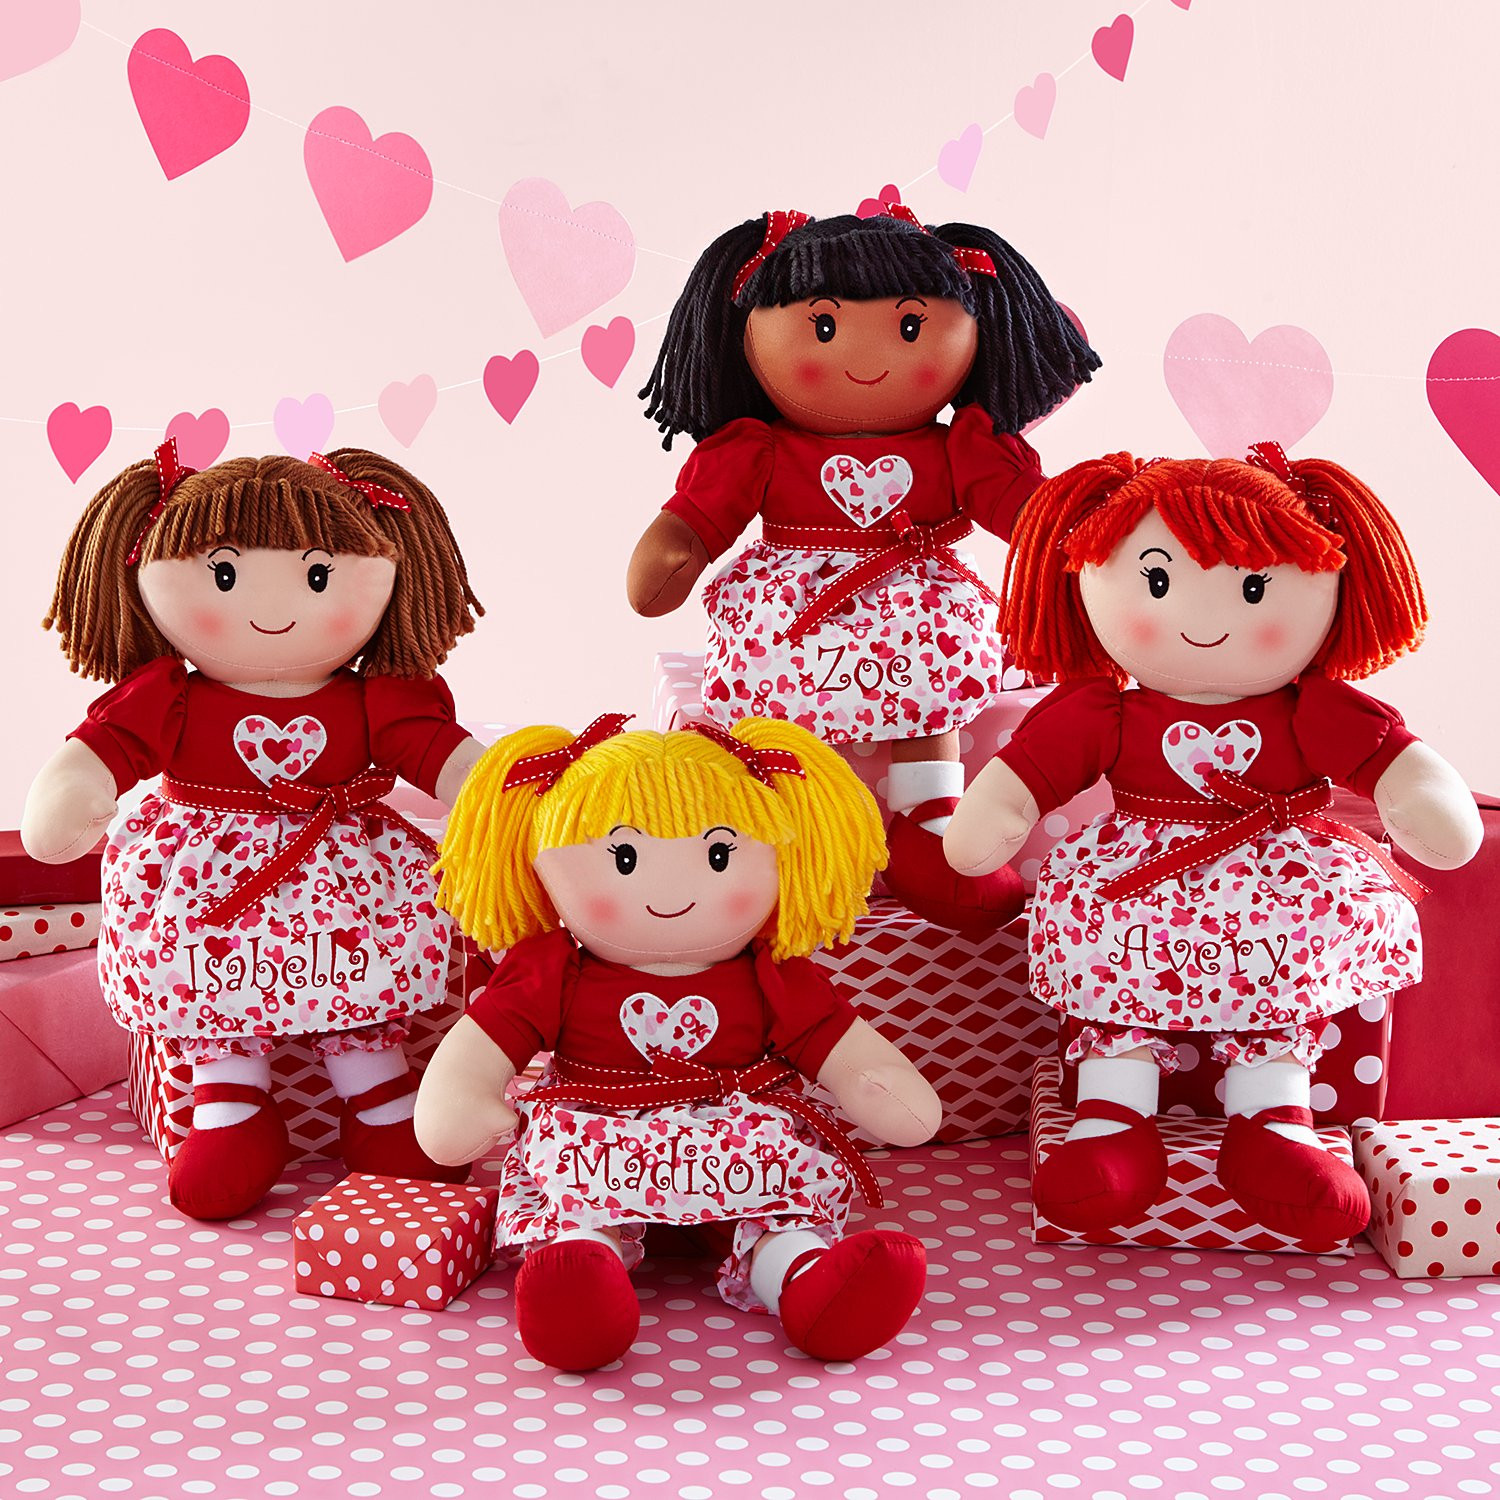 Valentine Gift Ideas For Baby
 Personalized Rag Dolls Baby Dolls